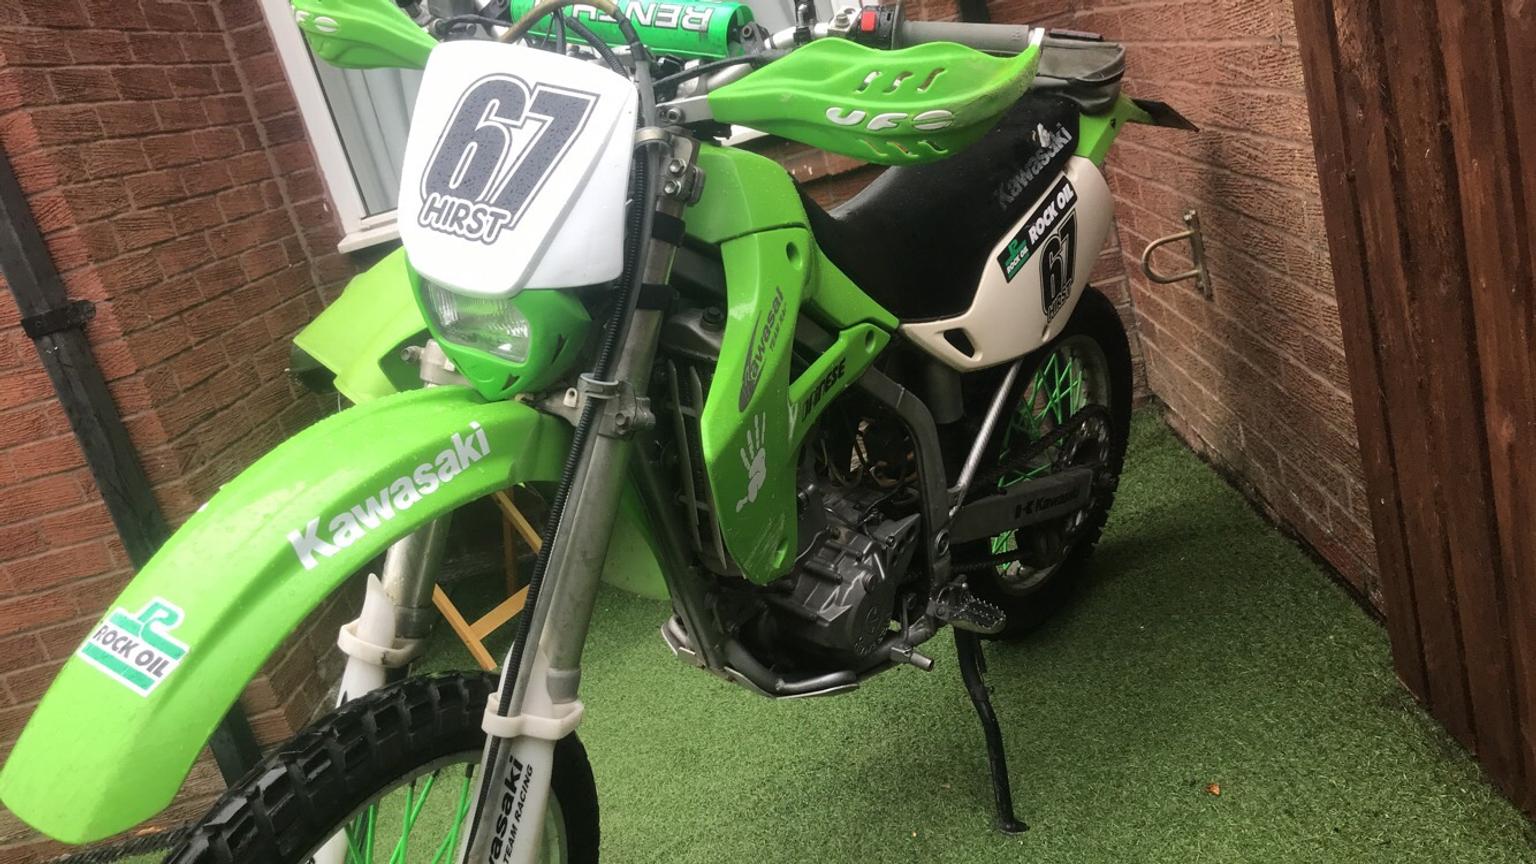 Klx 300 road legal in S6 Sheffield for £1,500.00 for sale